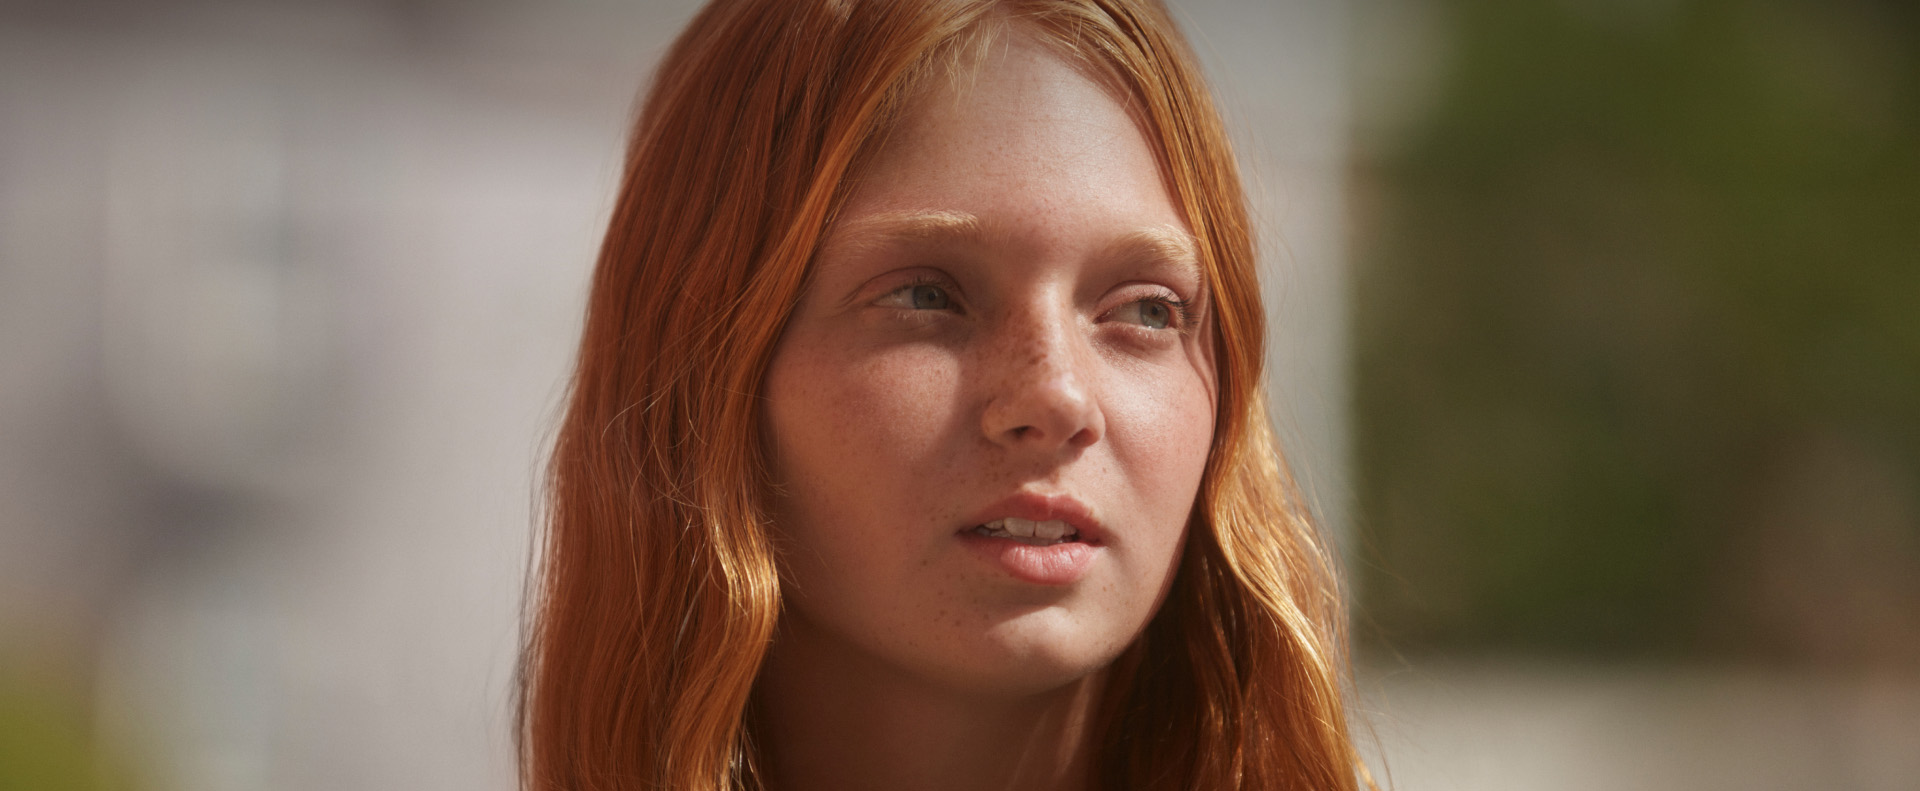 Young girl with red hair and freckles outdoors